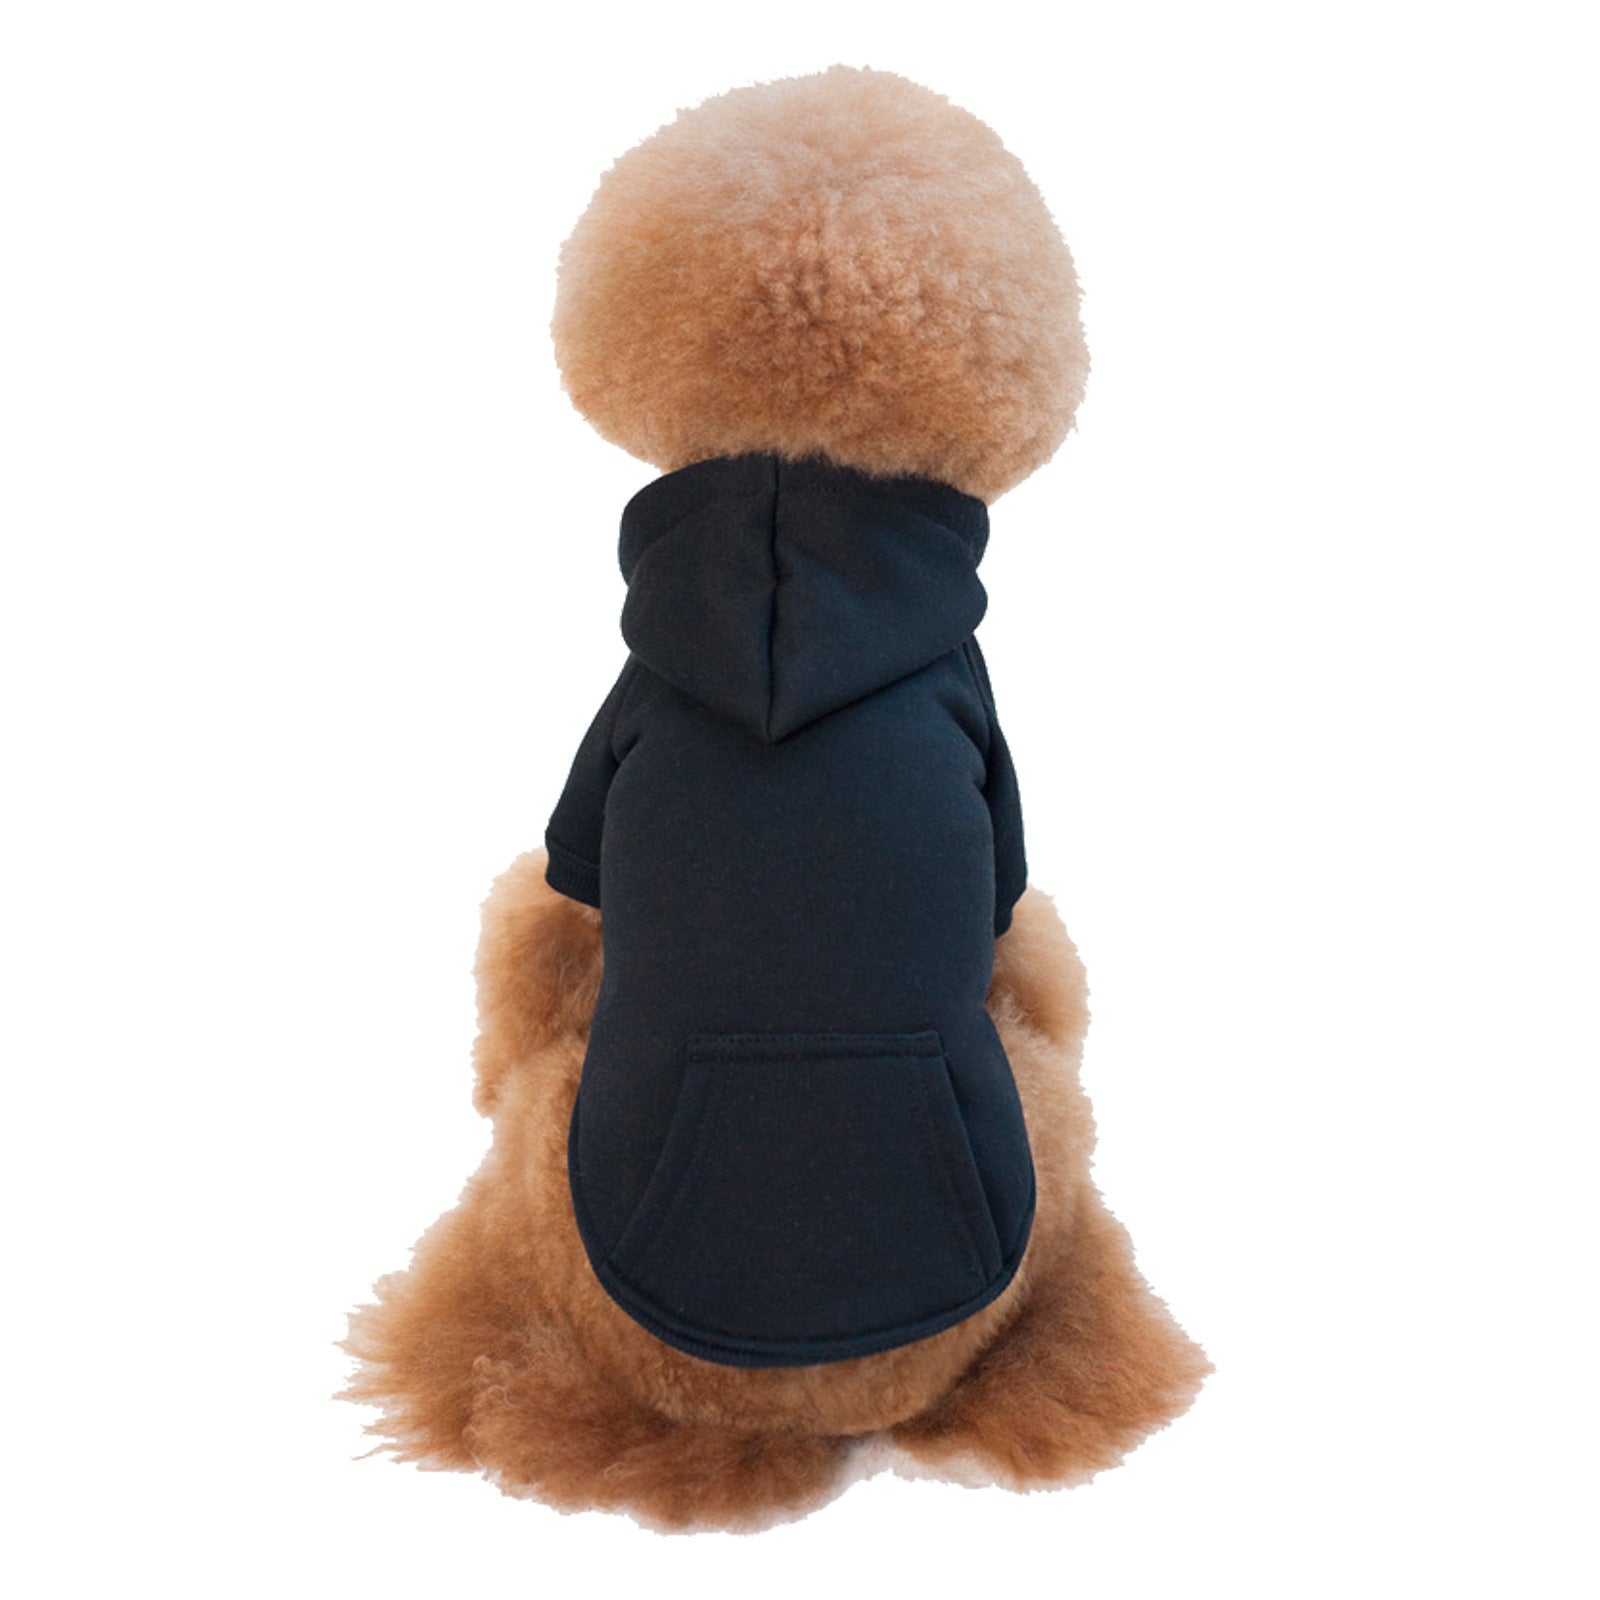 Hooded Sweater for Dogs or Cats!